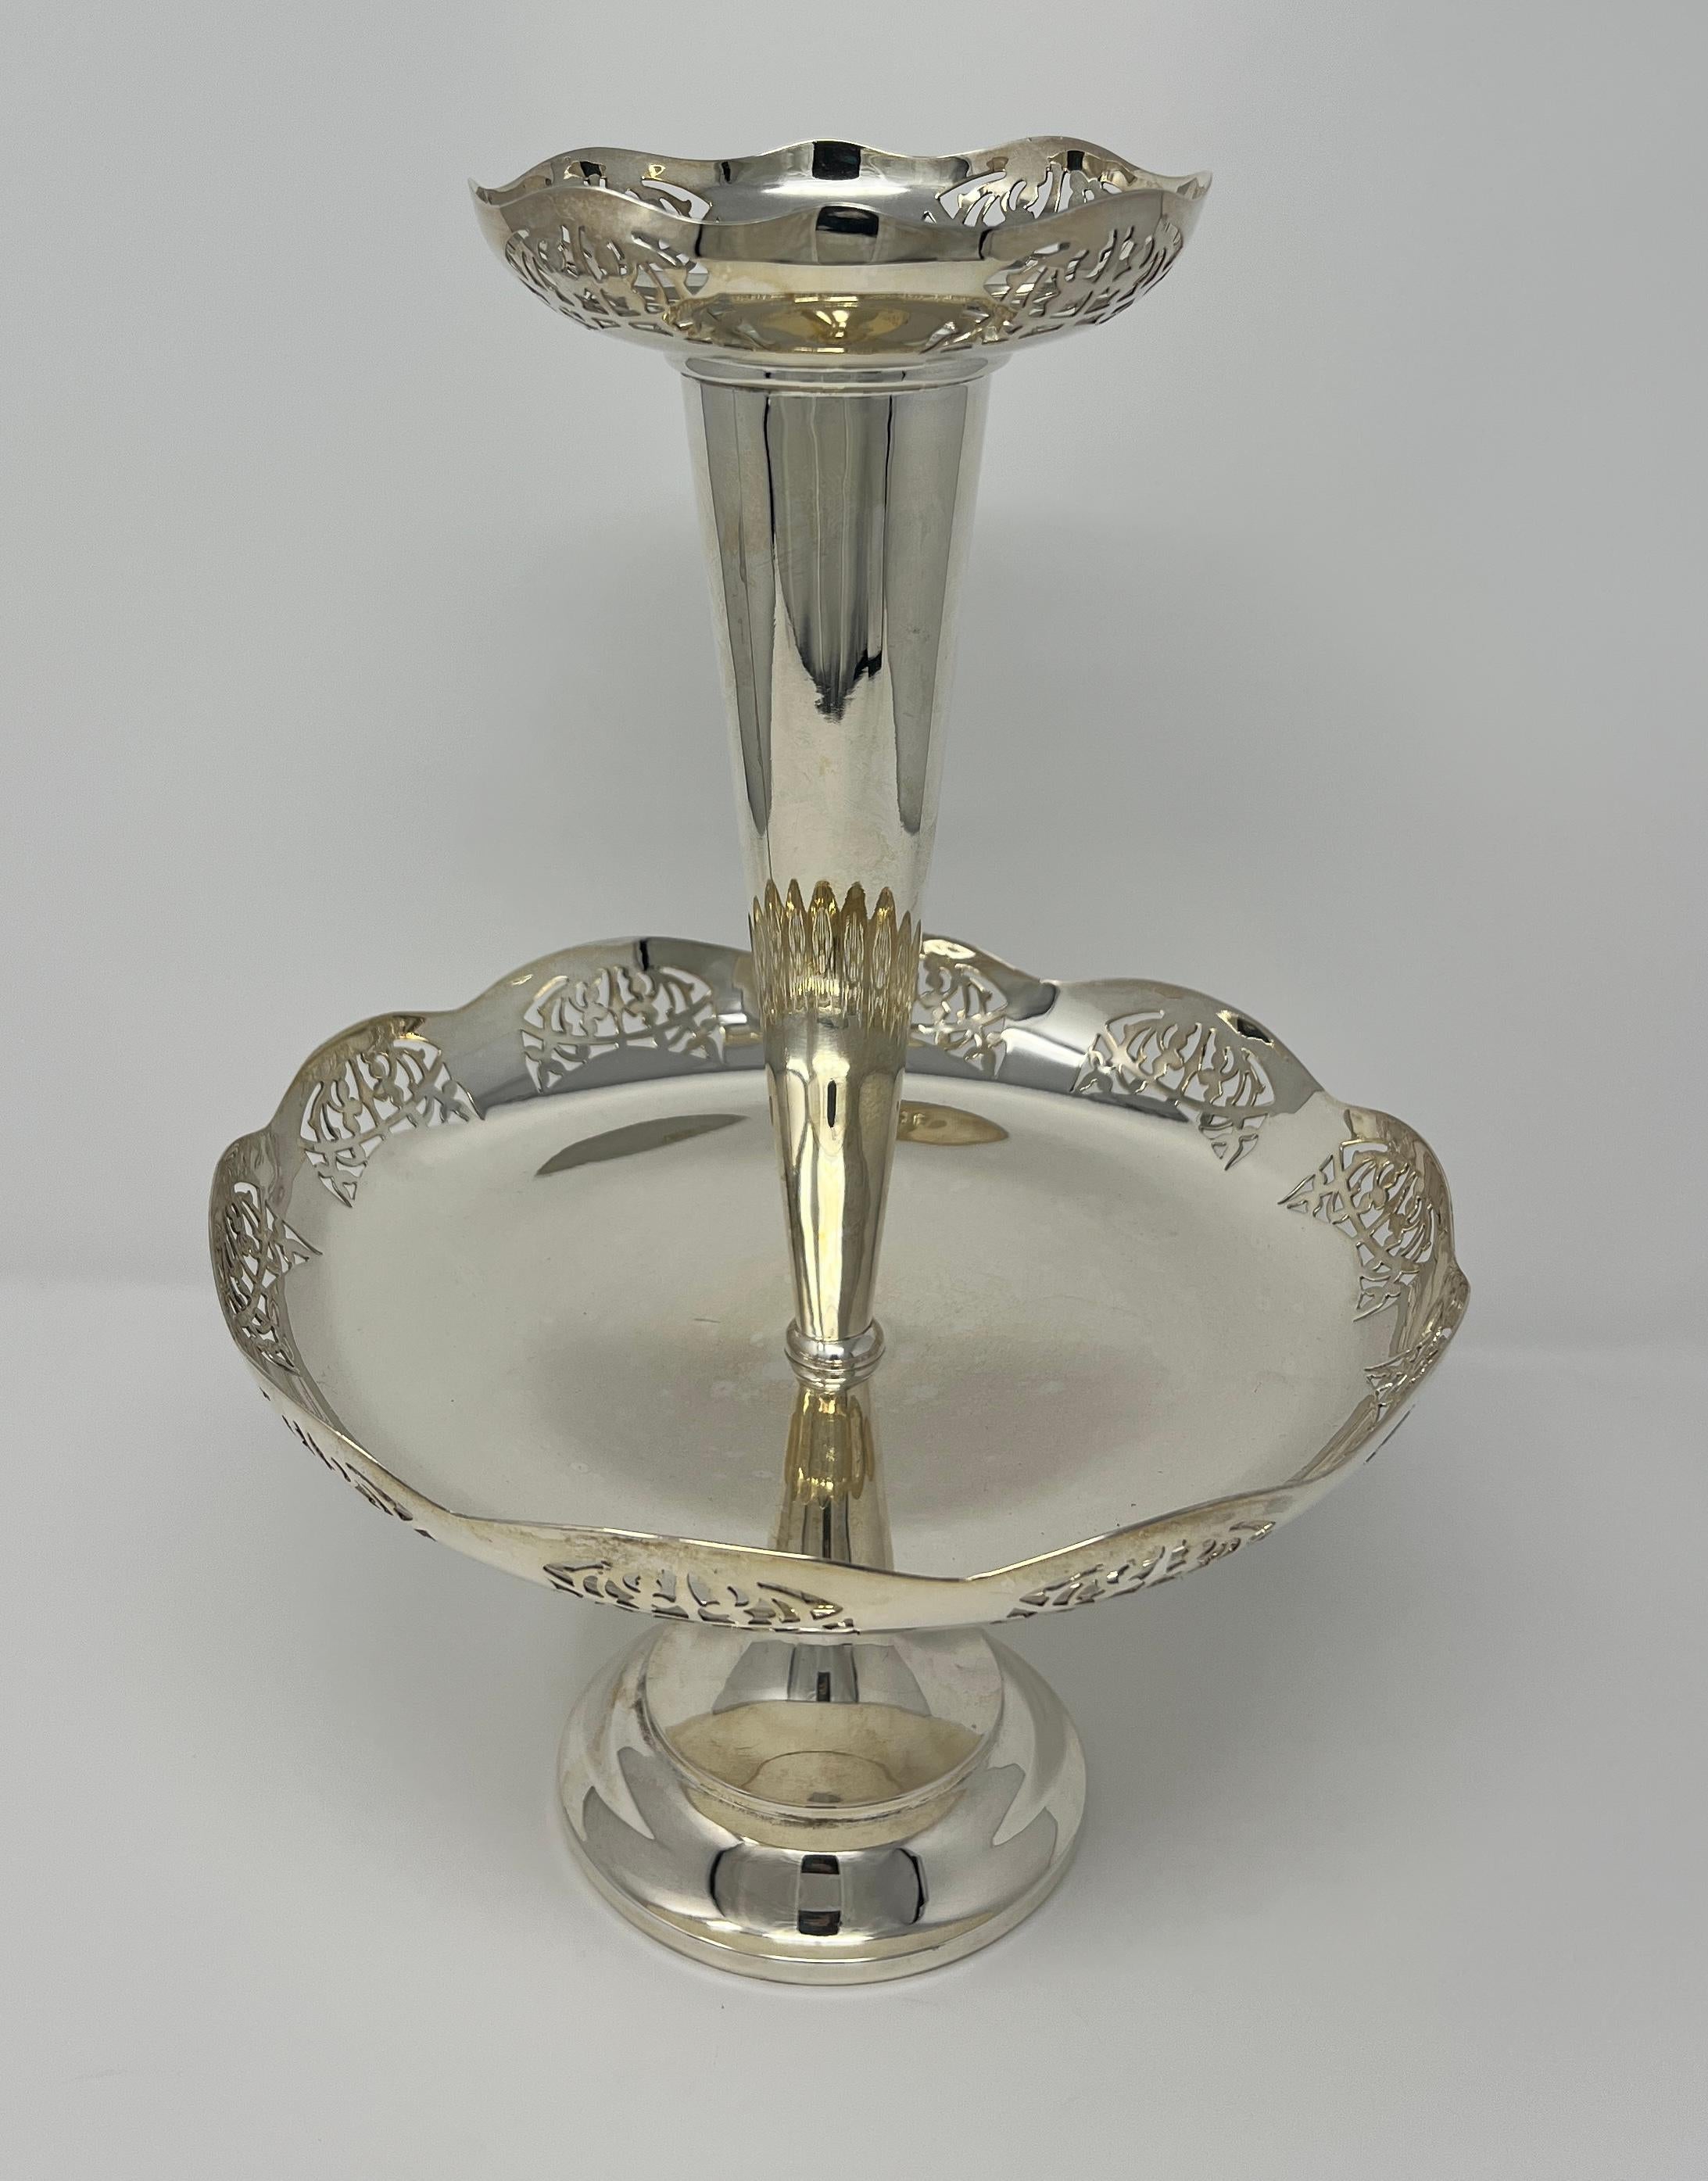 Antique English Silver Plate Epergne circa 1920.